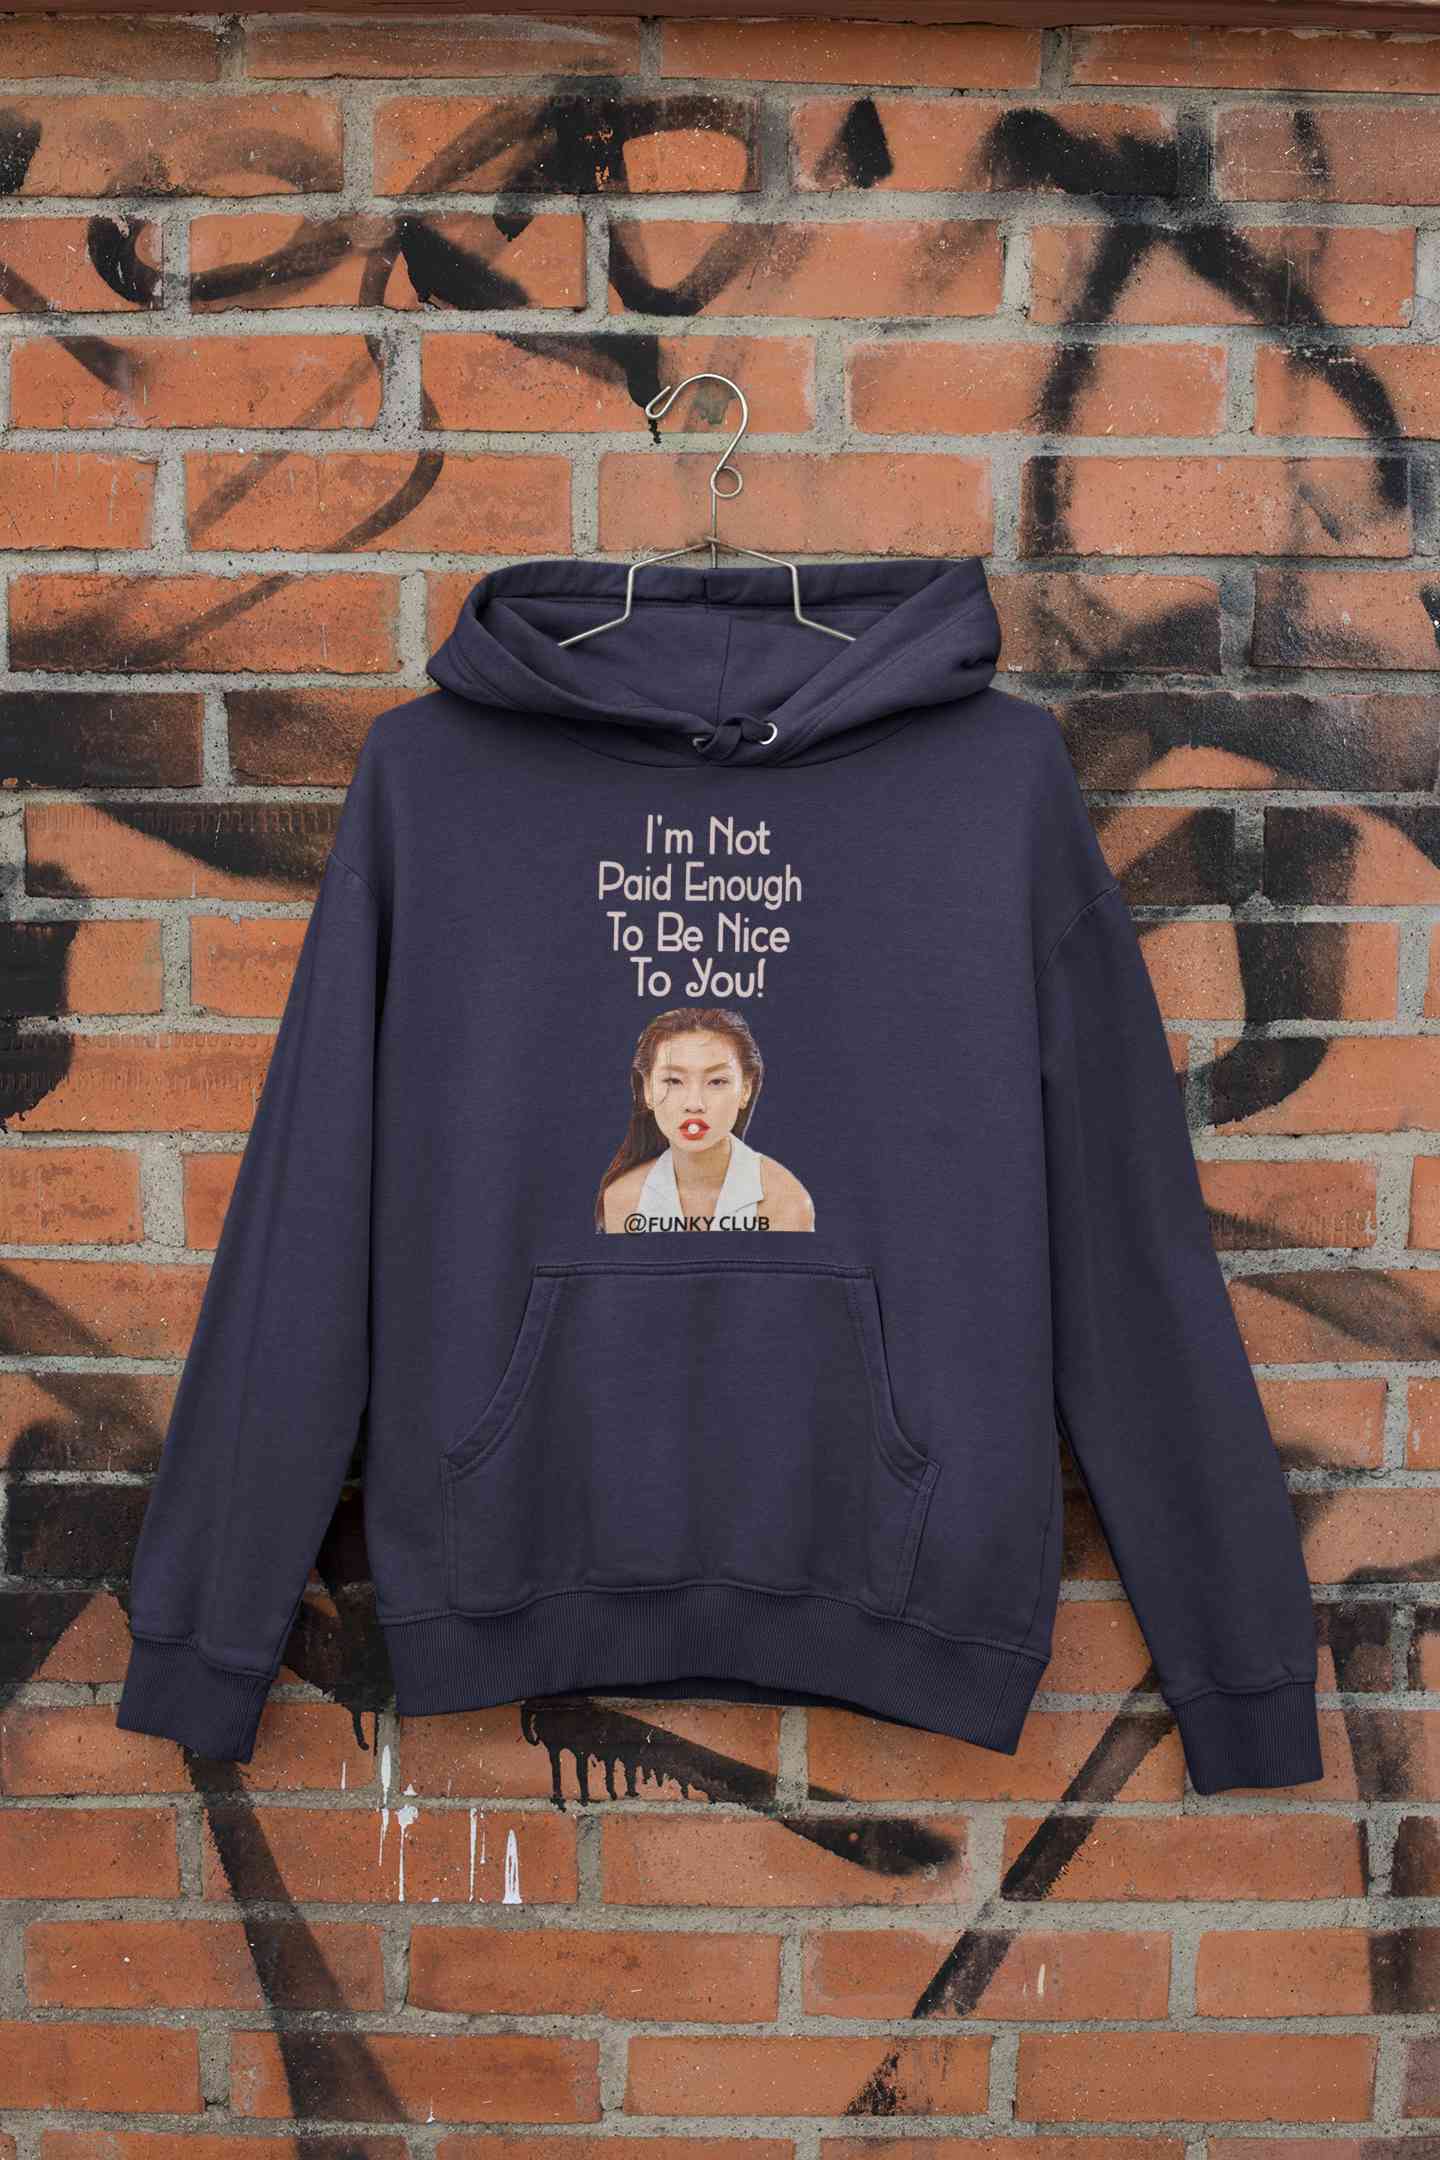 I Am Not Paid Enough To Be Nice To You Hoodies for Women-FunkyTeesClub